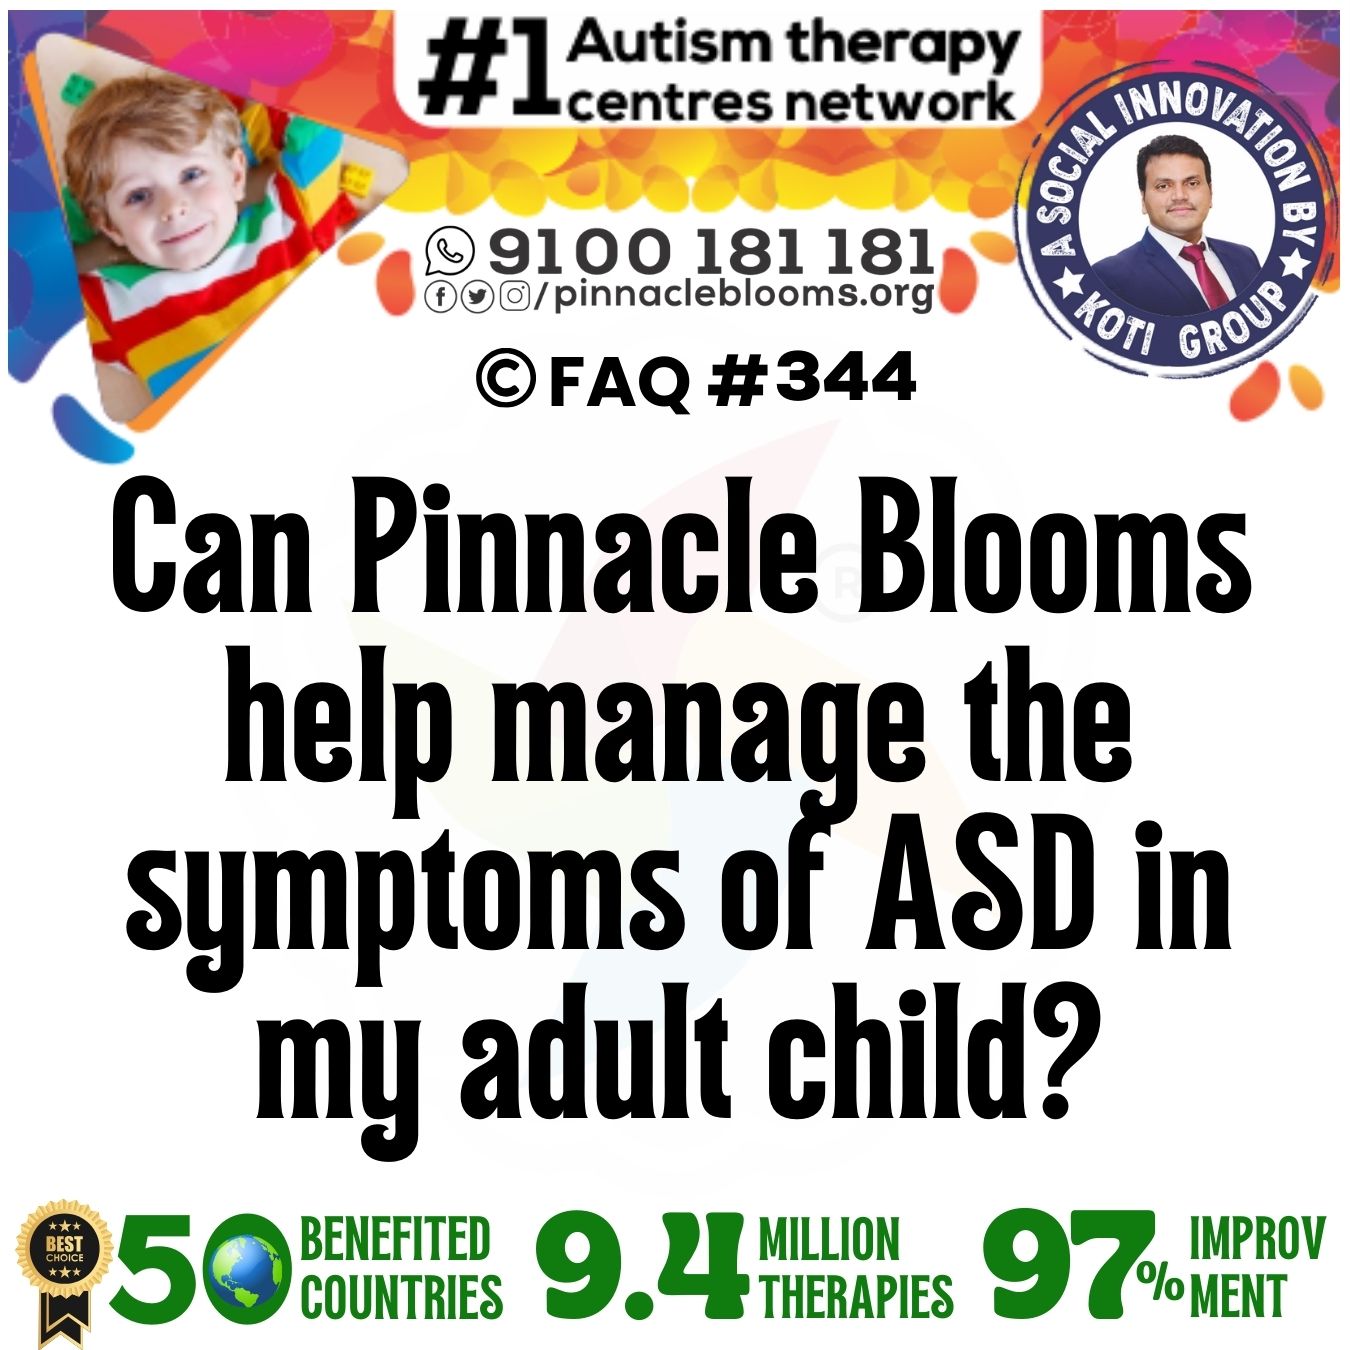 Can Pinnacle Blooms help manage the symptoms of ASD in my adult child?